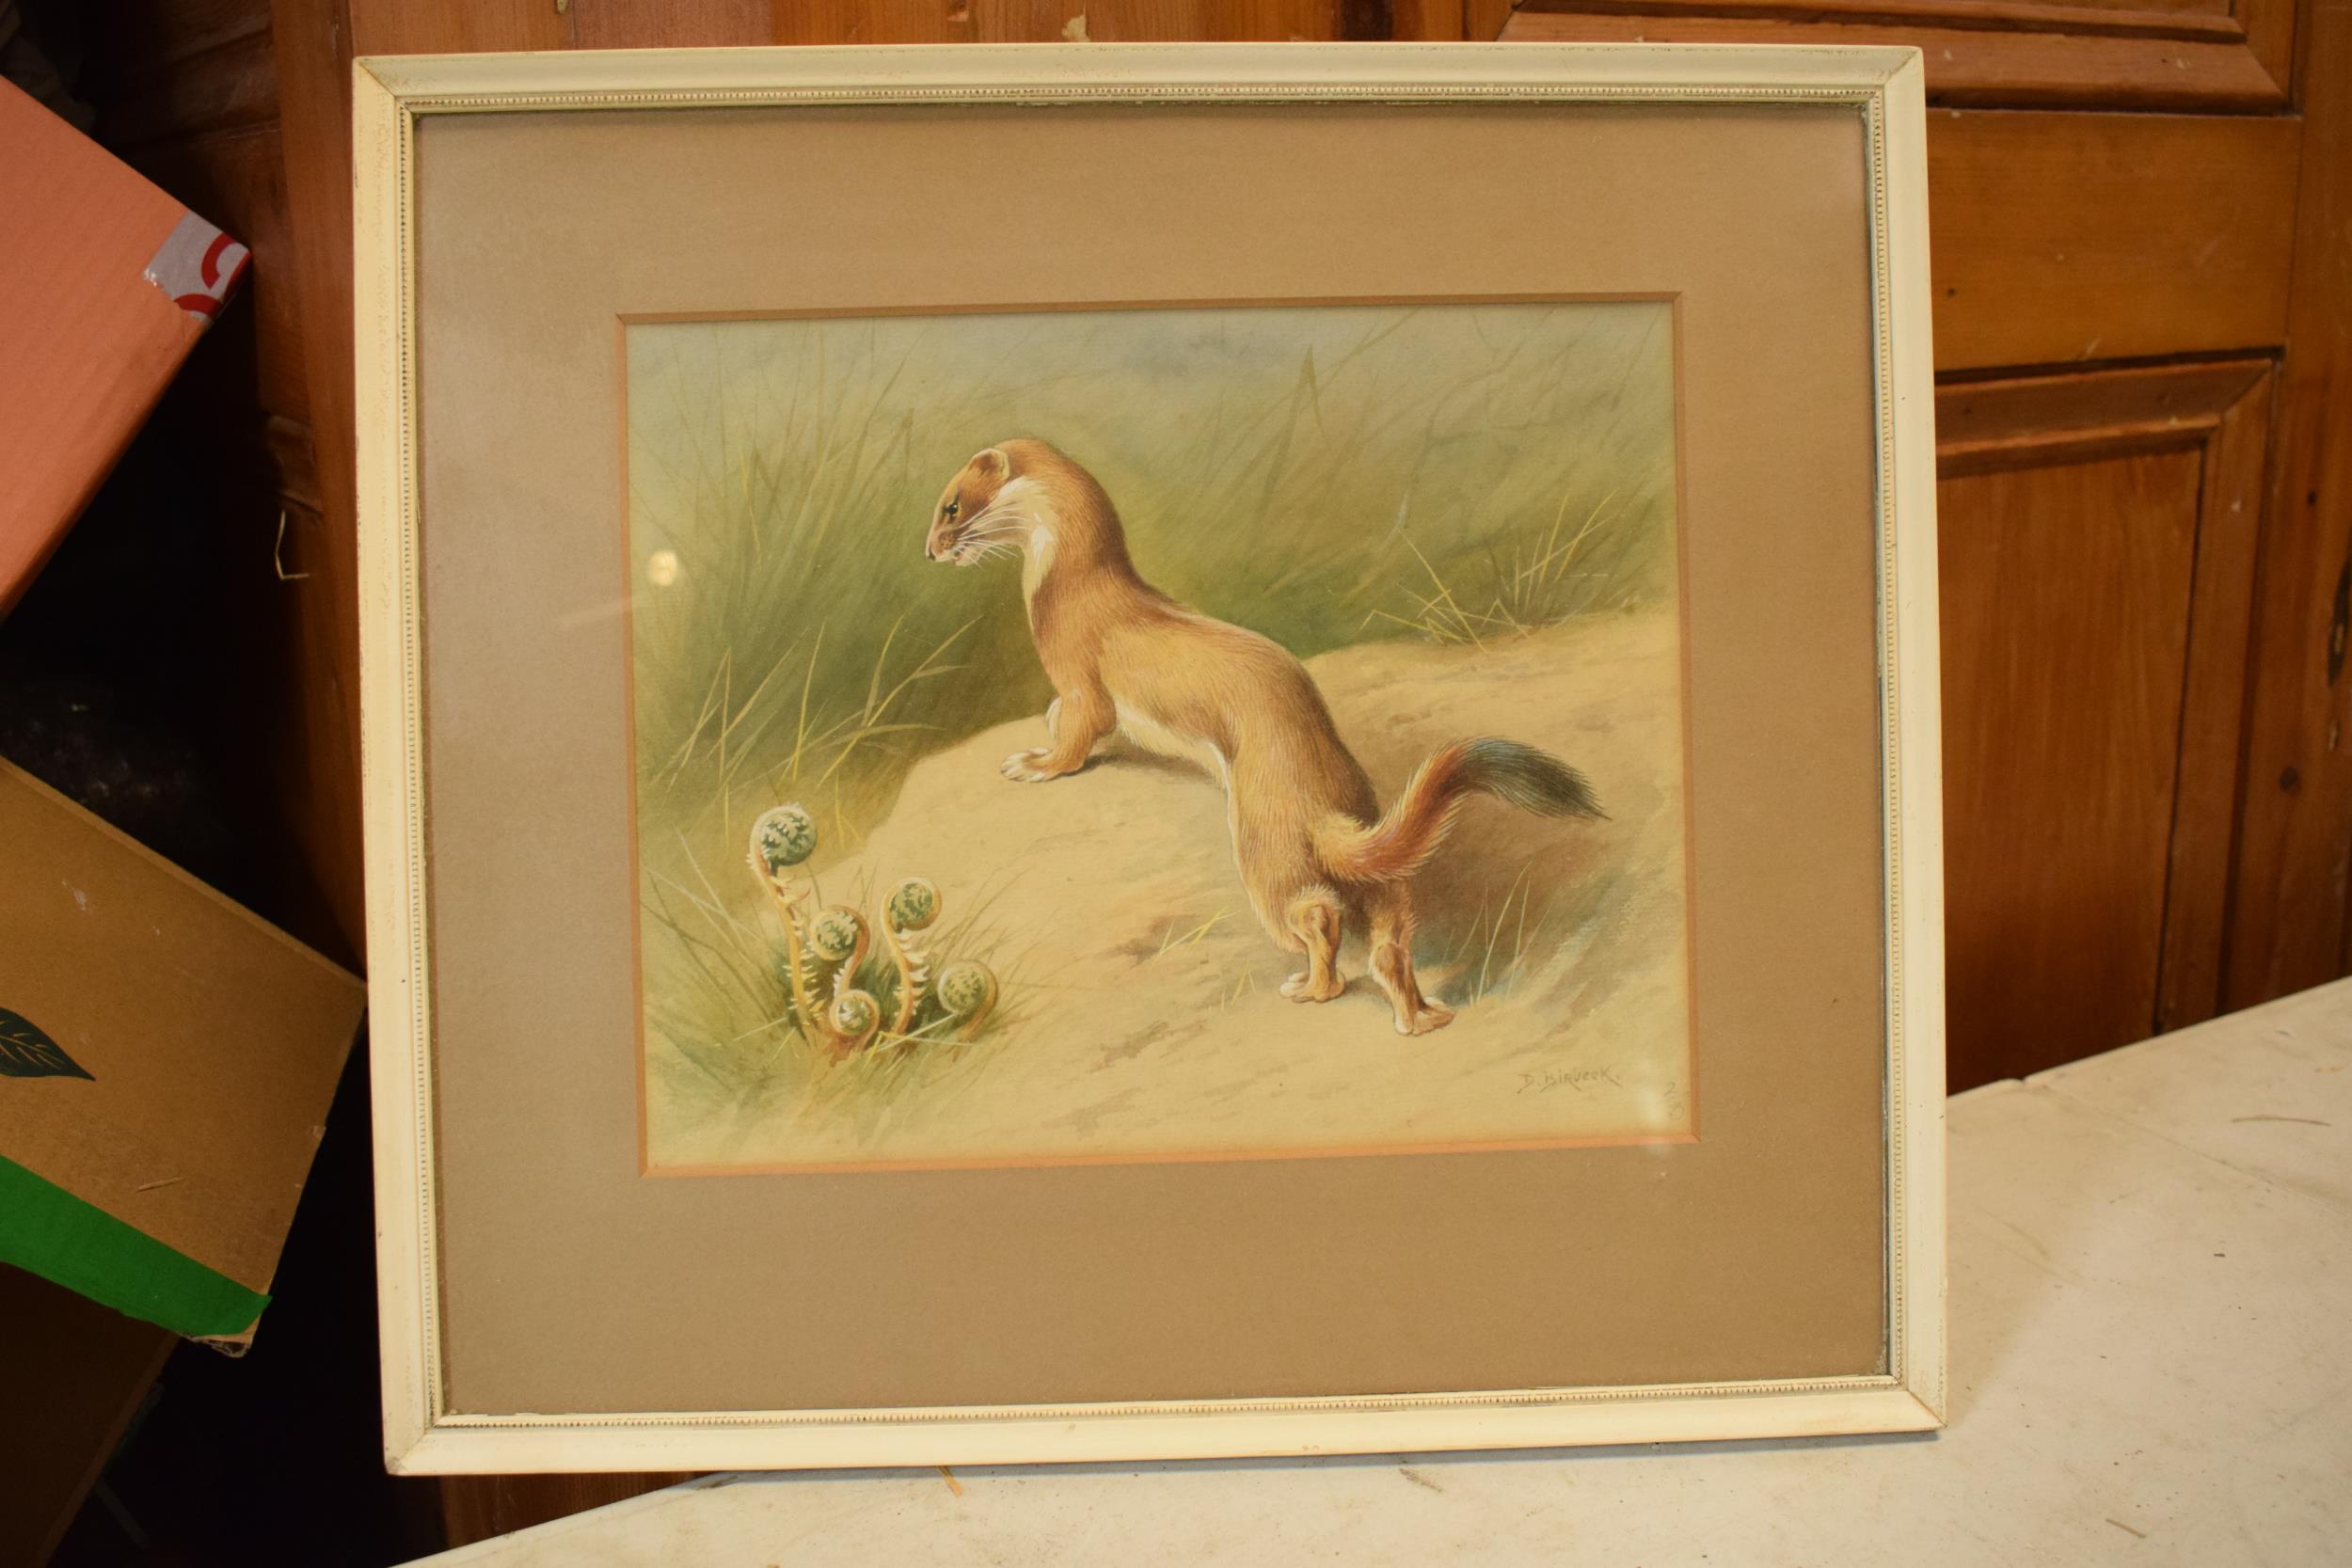 Donald Birbeck: print of a weasel, 2/3, signed by Birbeck, a former Royal Crown Derby and Royal - Image 3 of 4